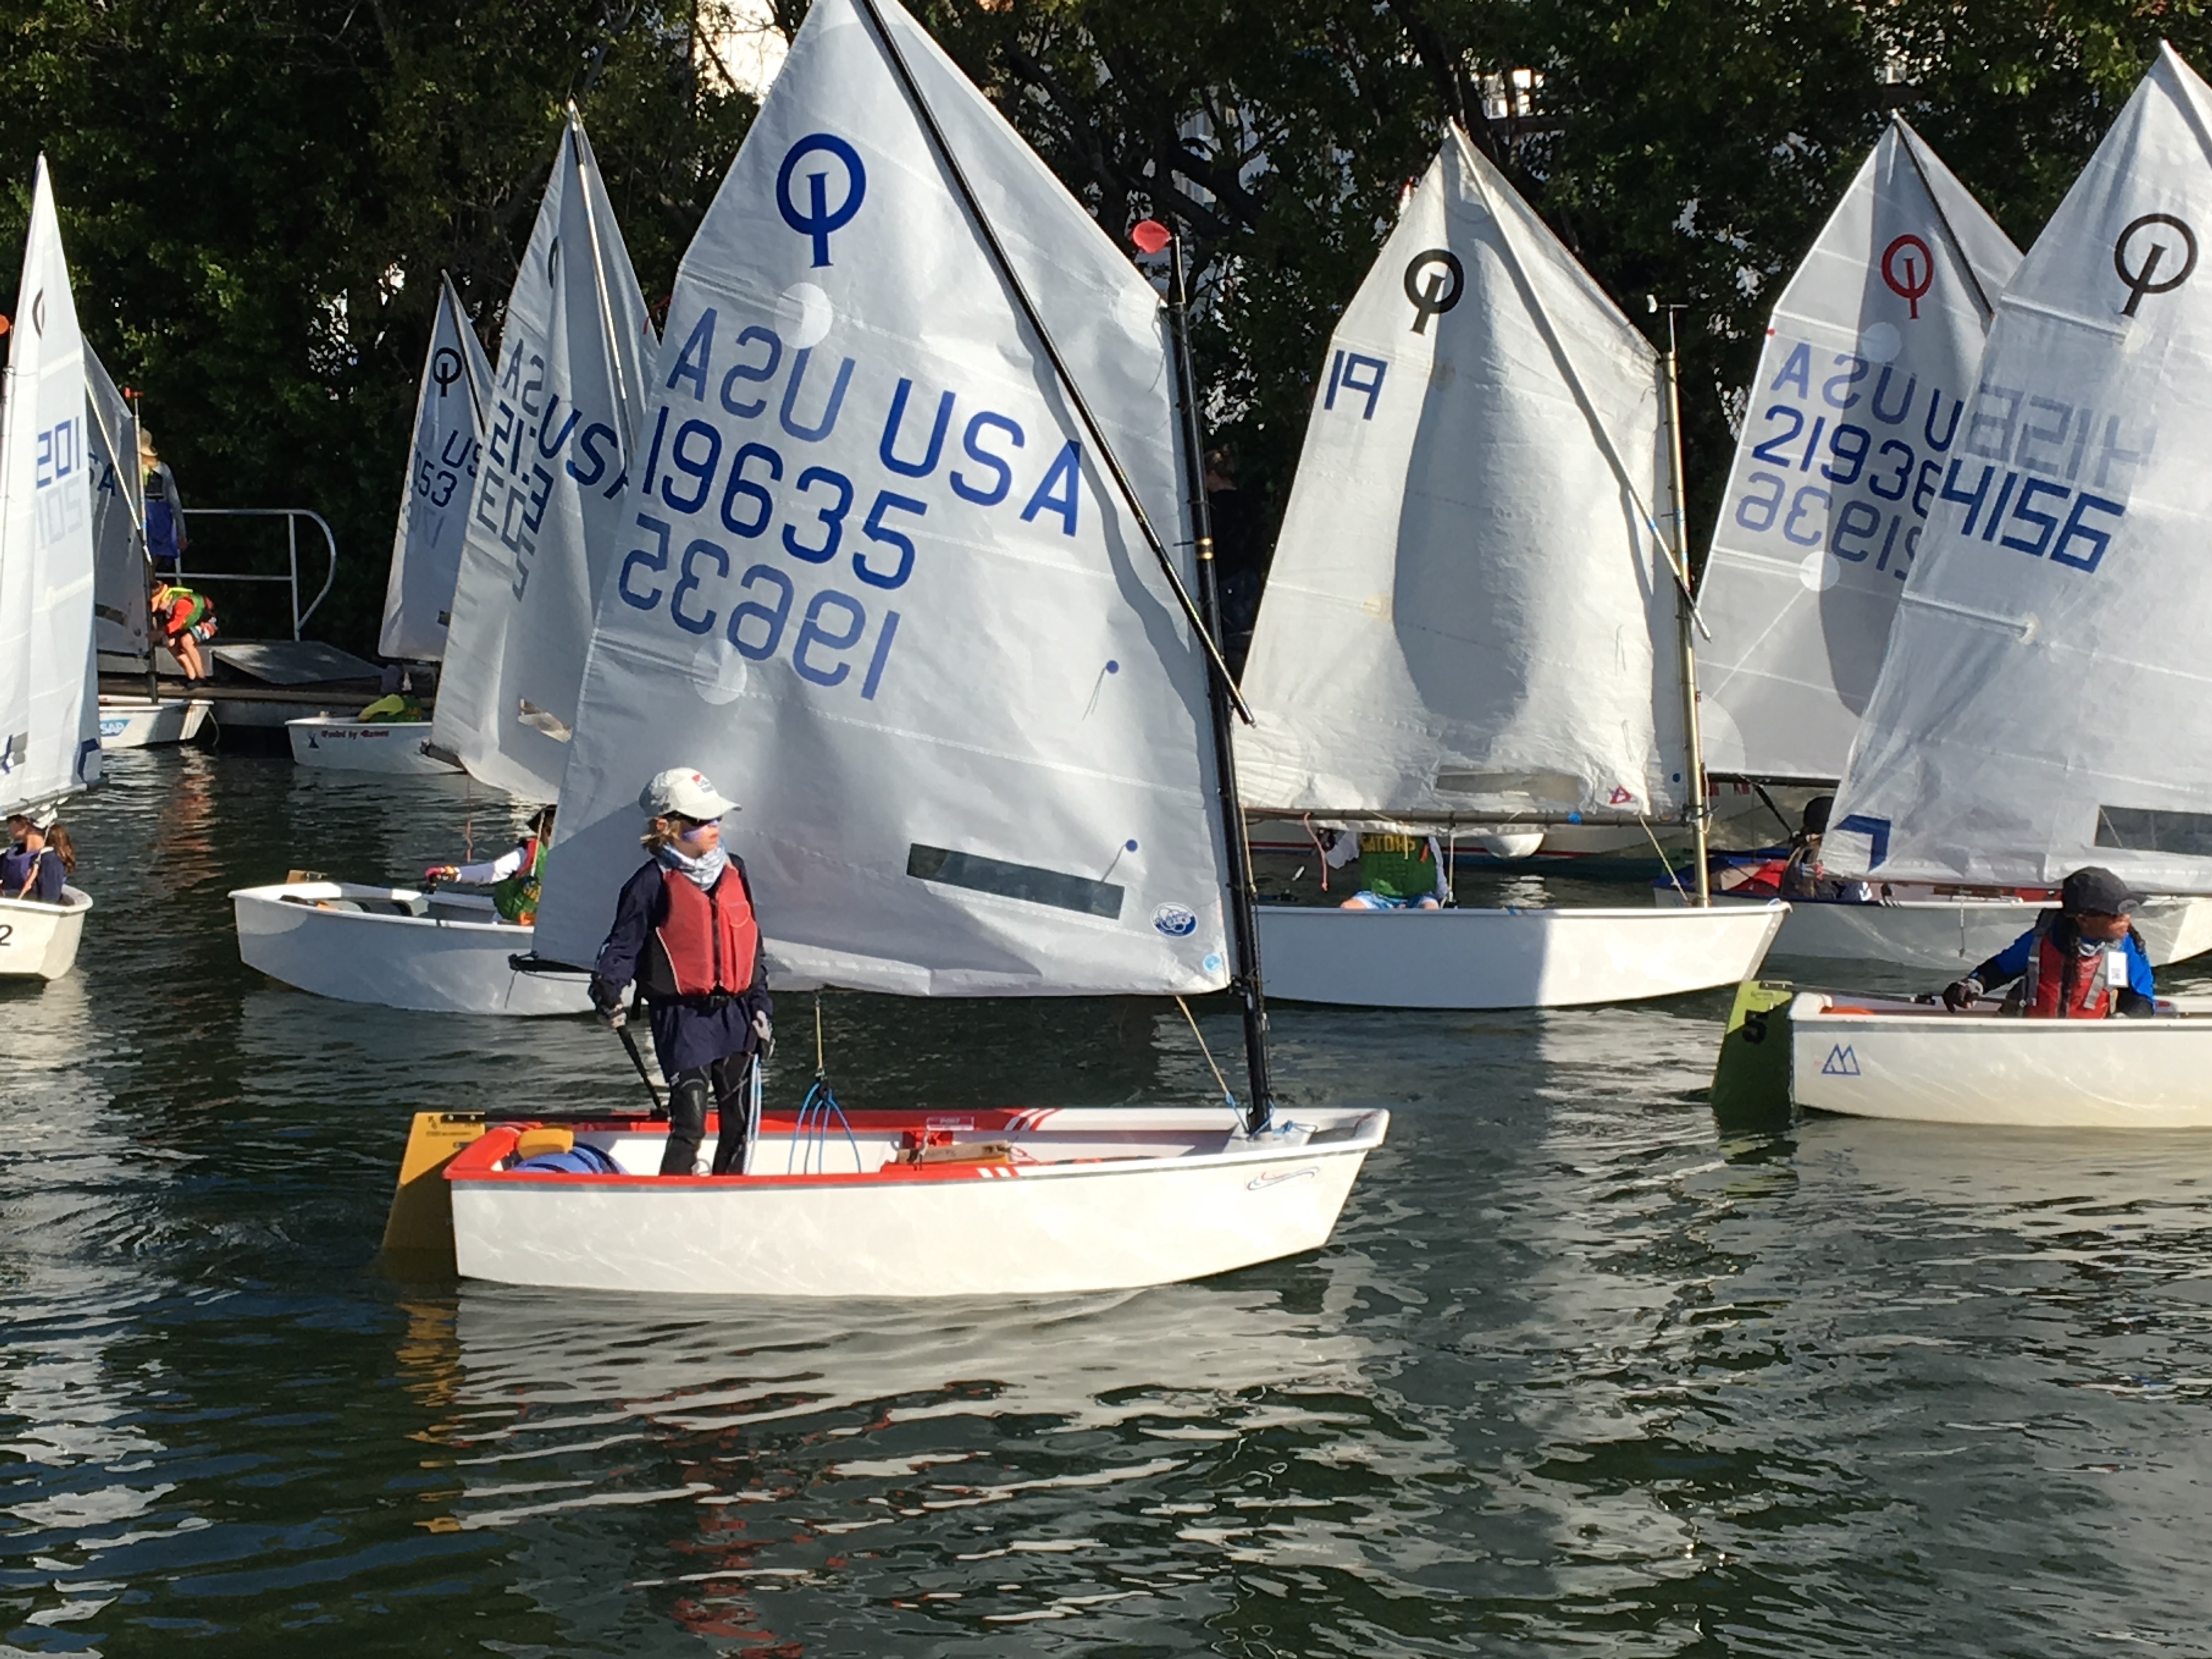 coconut grove sailing club summer camp - We Have The Greatest Biog ...